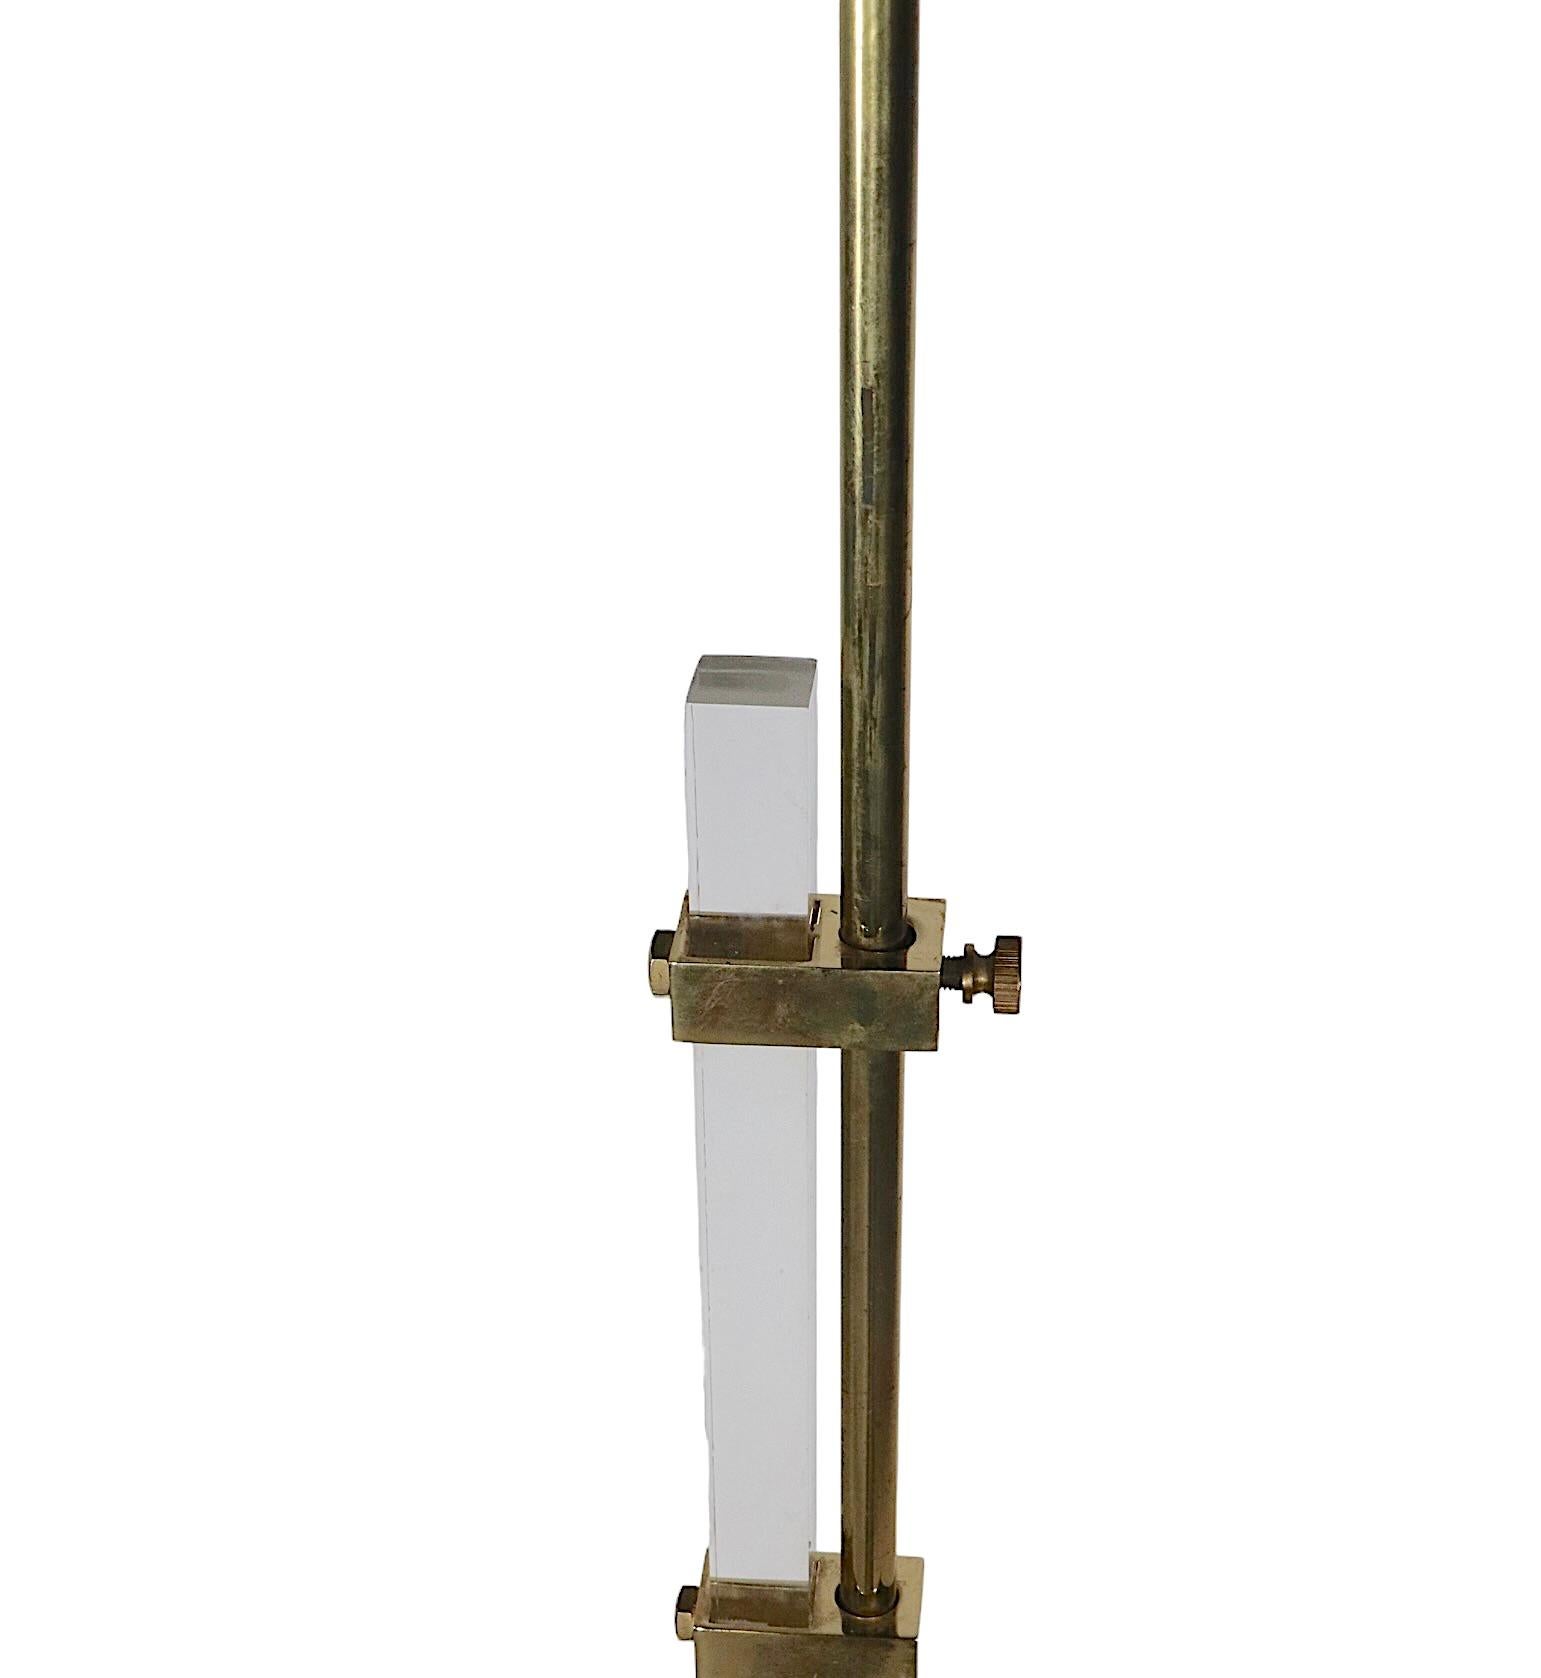  Adjustable Hollywood Regency Style Brass and Lucite Floor Lamp c. 1970/1980's For Sale 14